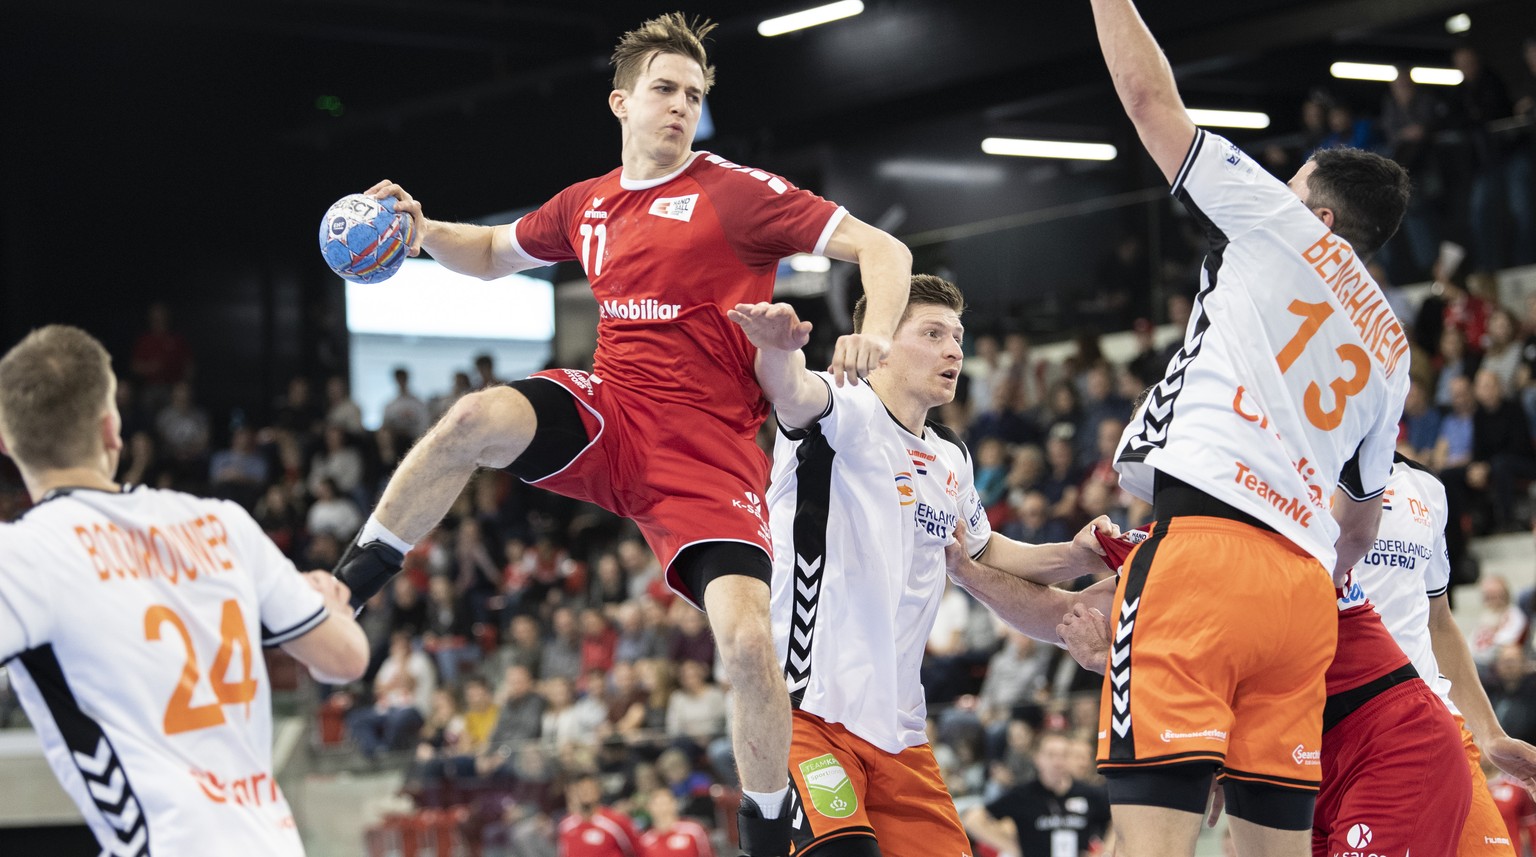 Switzerland&#039;s Roman Sidorowicz, left, in action against Netherlands&#039; Samir Benghanem, right, during the Yellow Cup Handball game between Switzerland and Netherlands in Switzerland, Winterthu ...